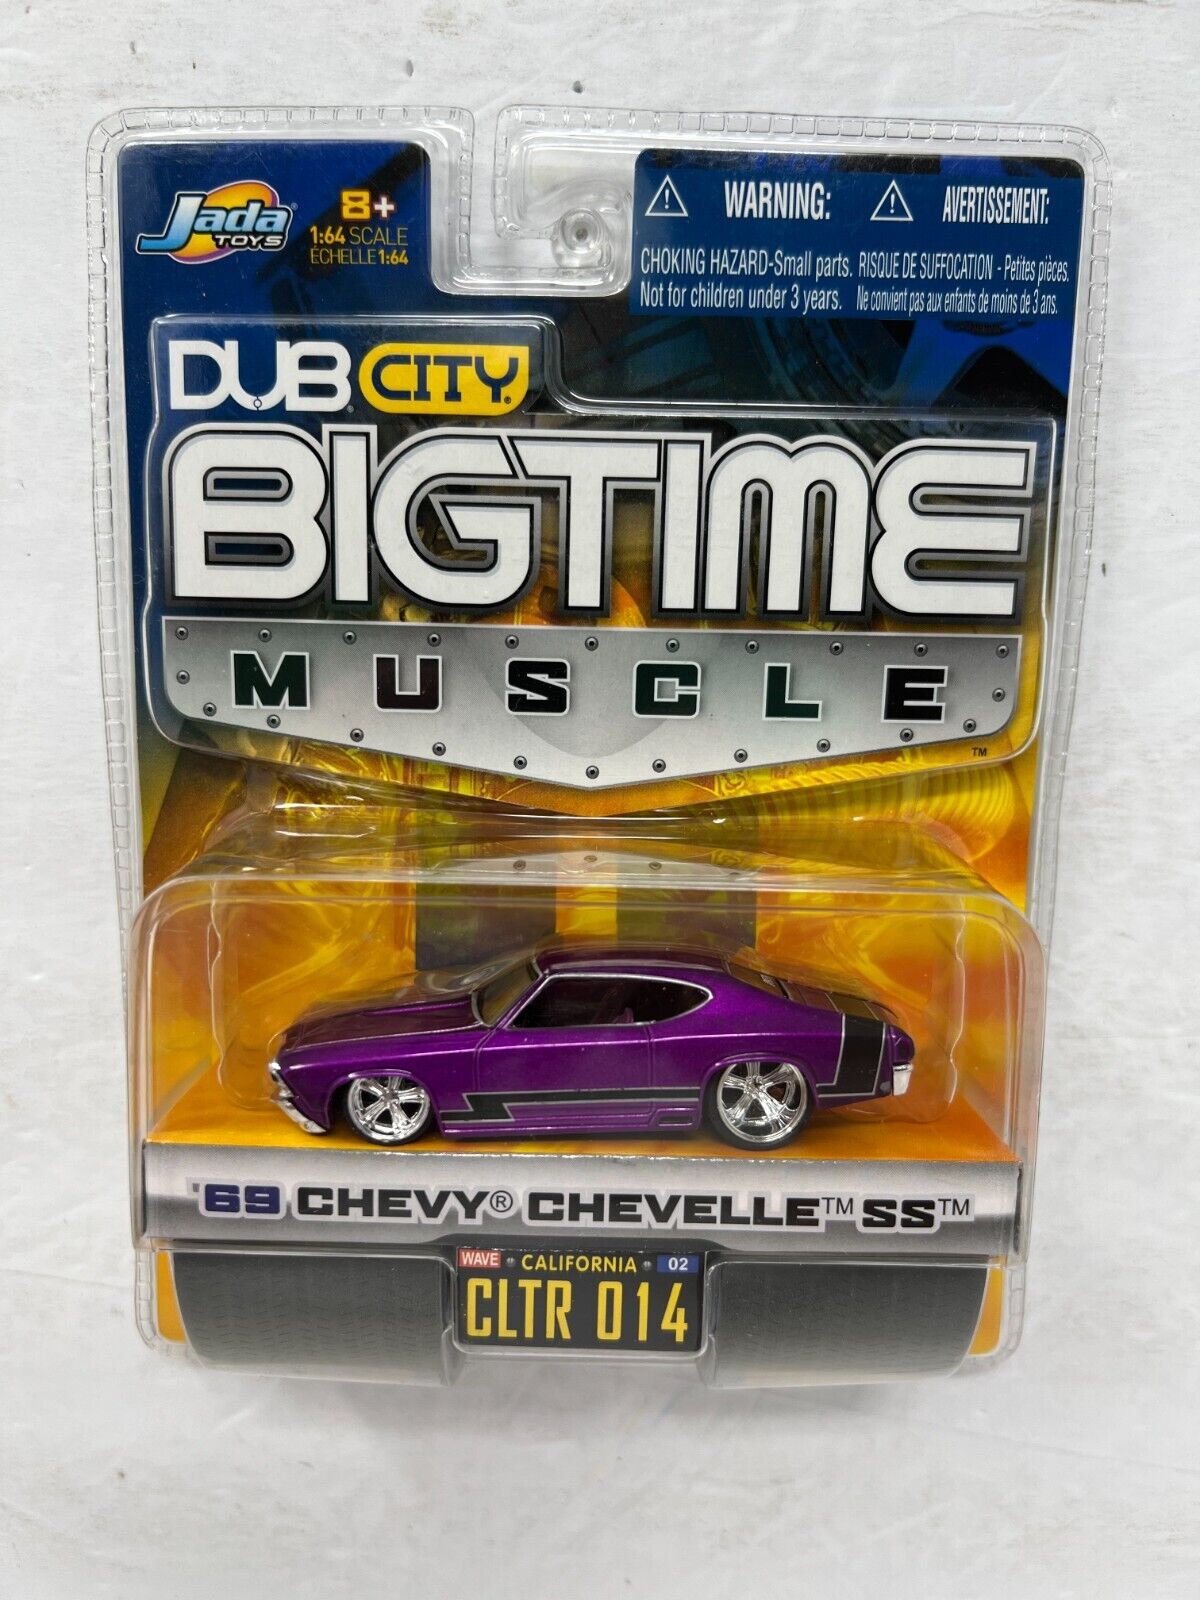 Jada Dub City Bigtime Muscle '69 Chevy Chevelle SS 1:64 Diecast